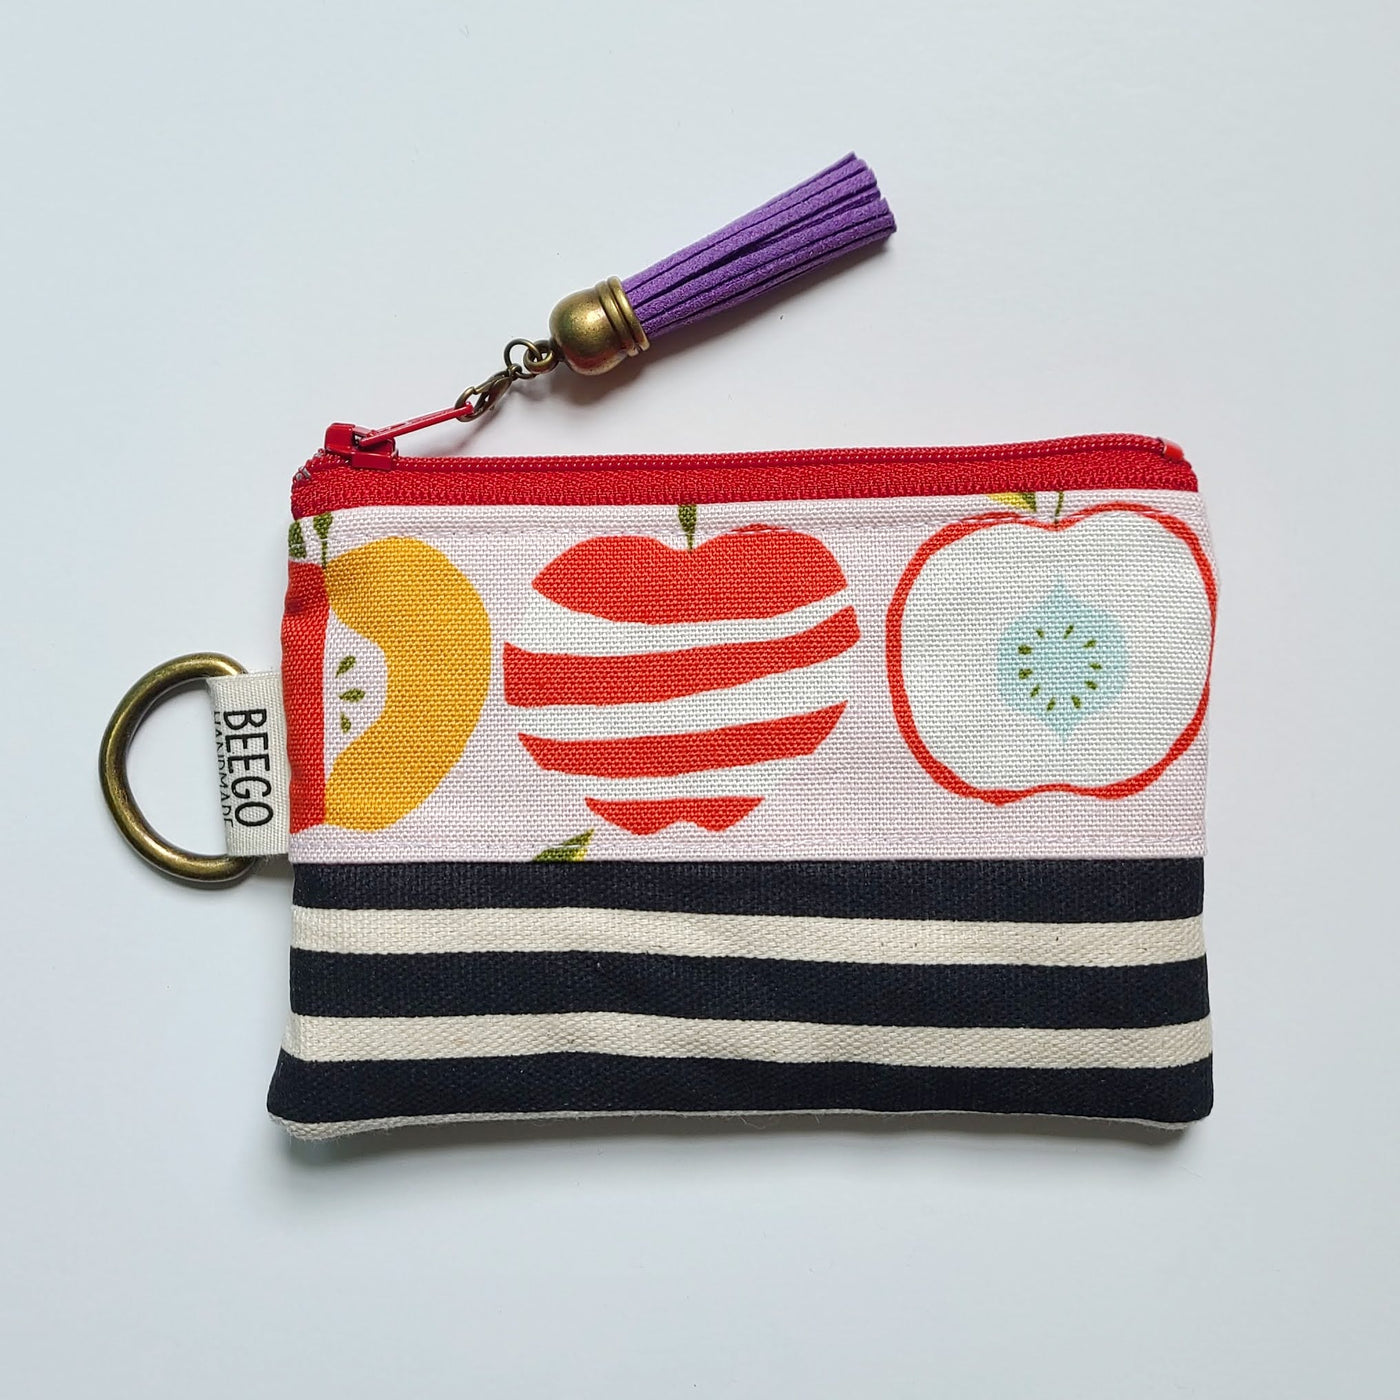 #57 - Black and White Stripes and Apples Keyring Coin Purse